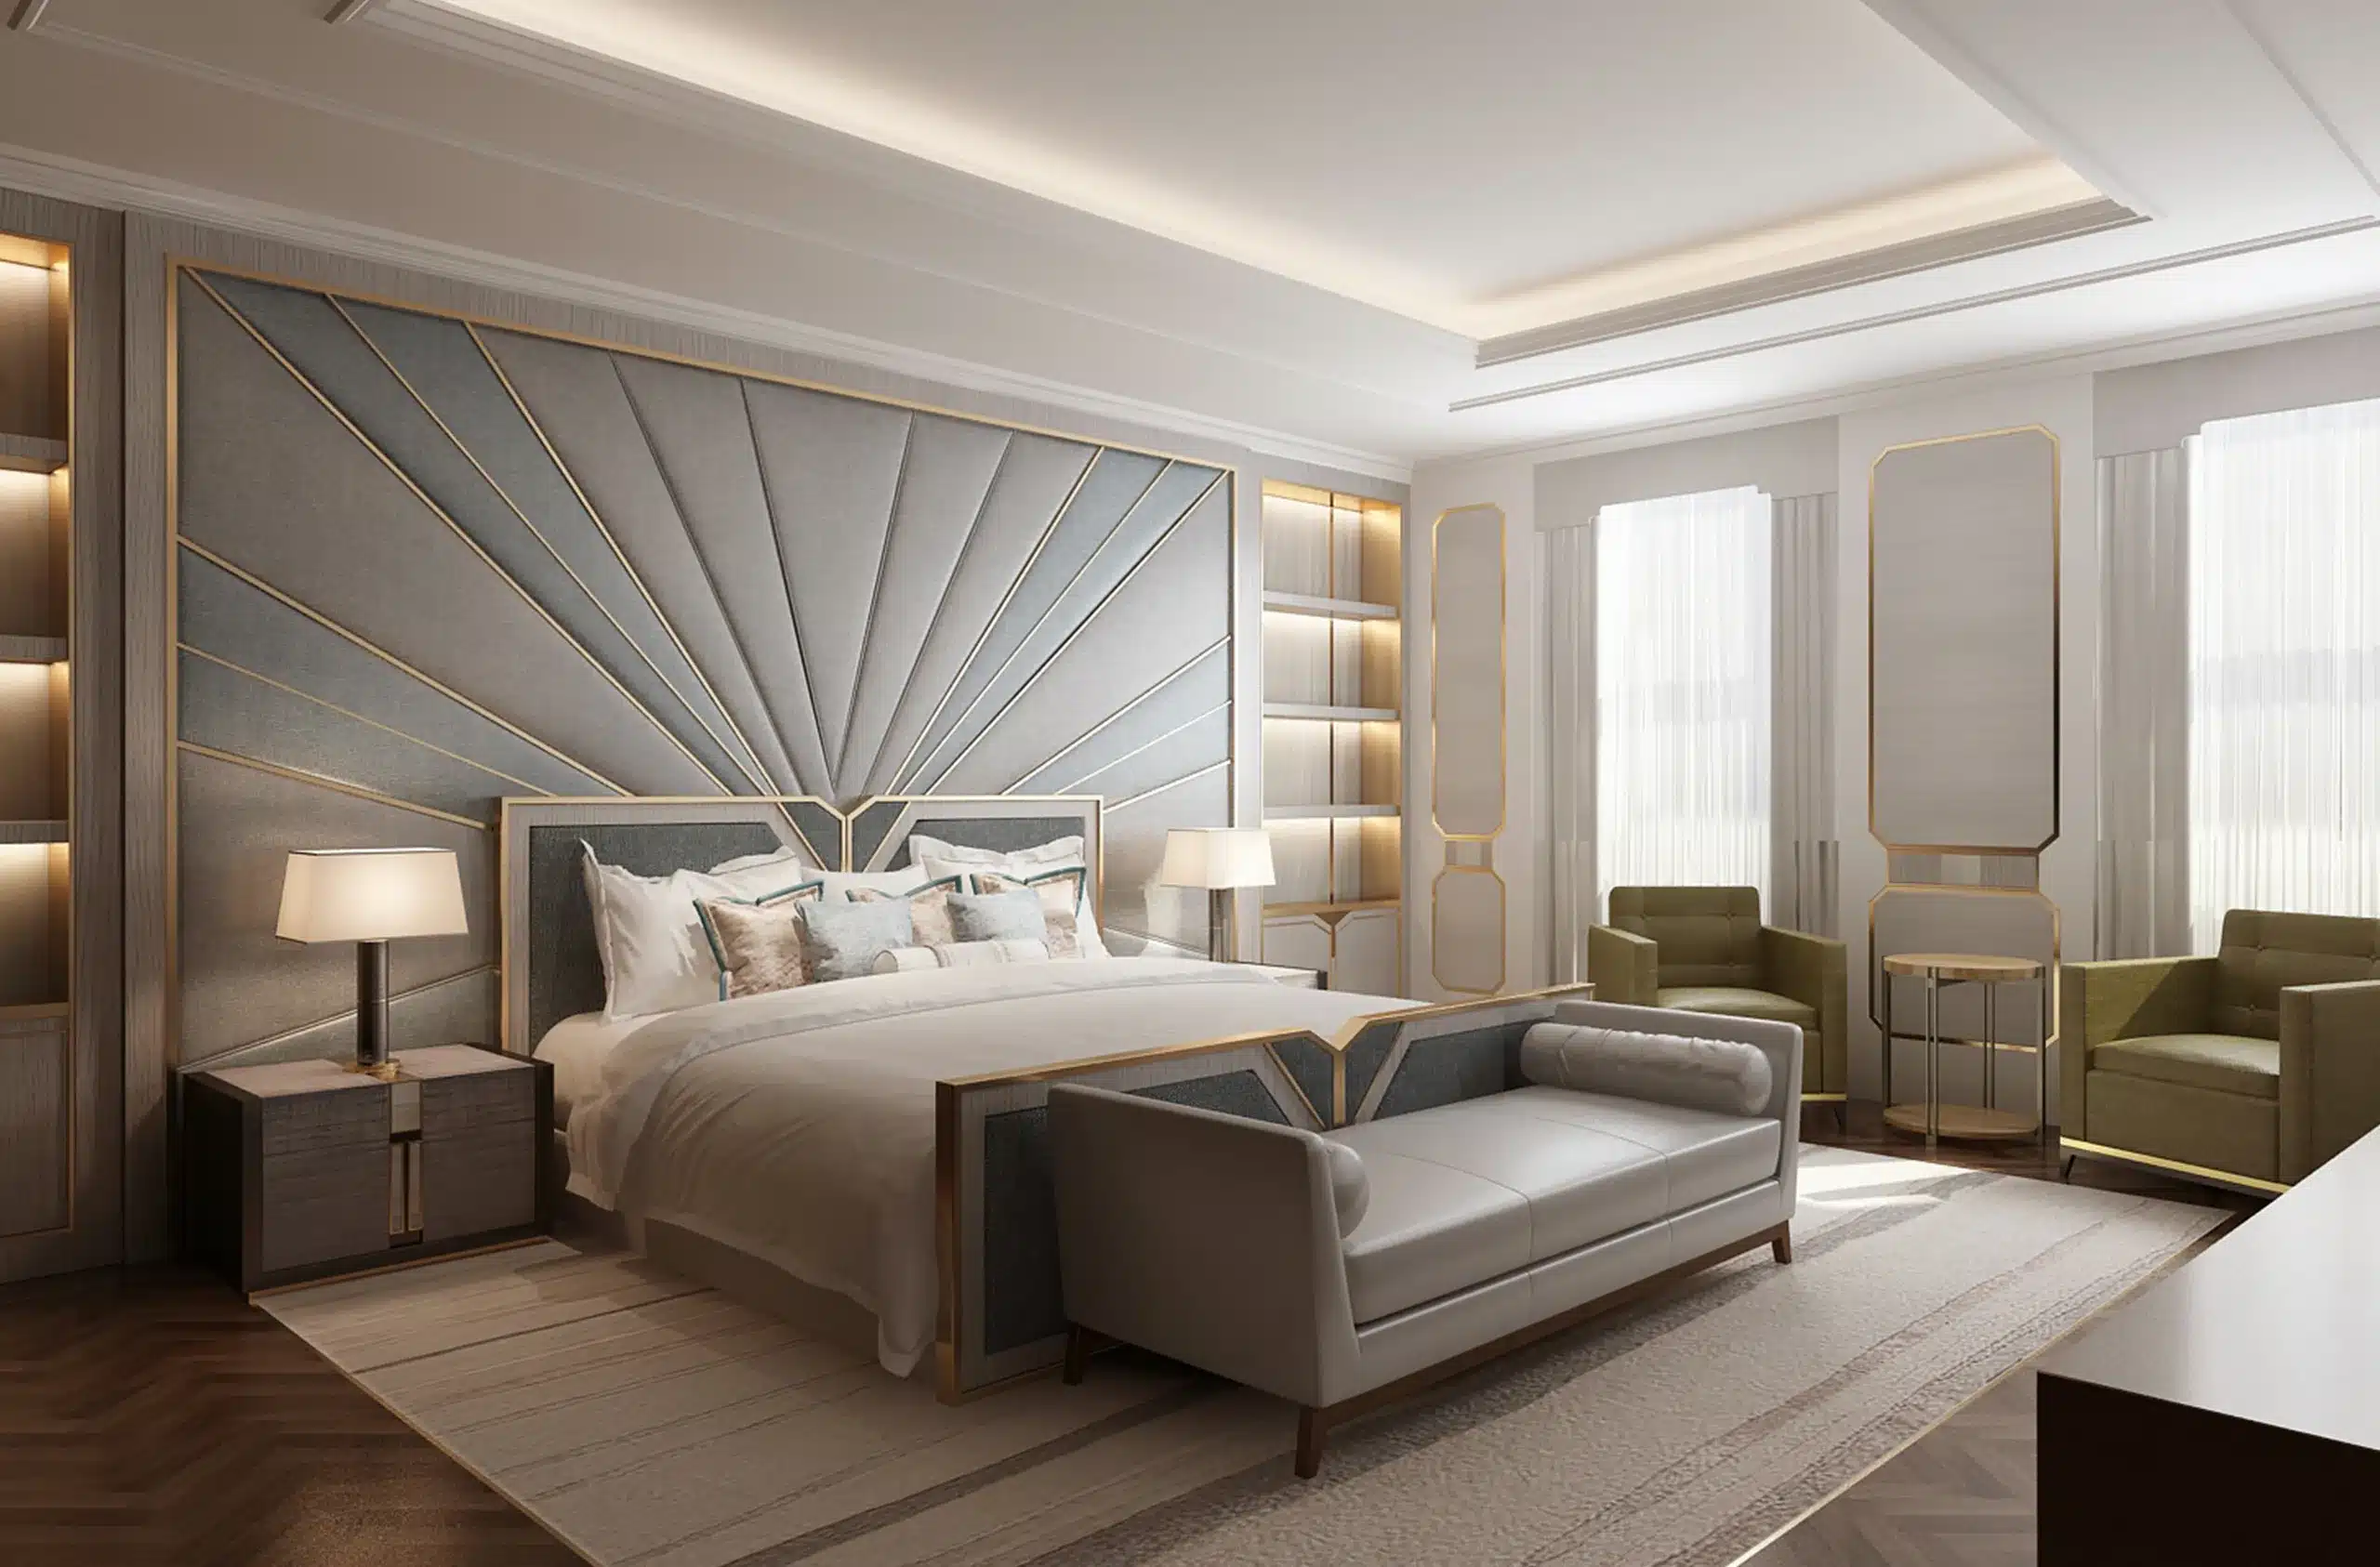 A bedroom in an interior design project completed by katharine pooleys london based studio